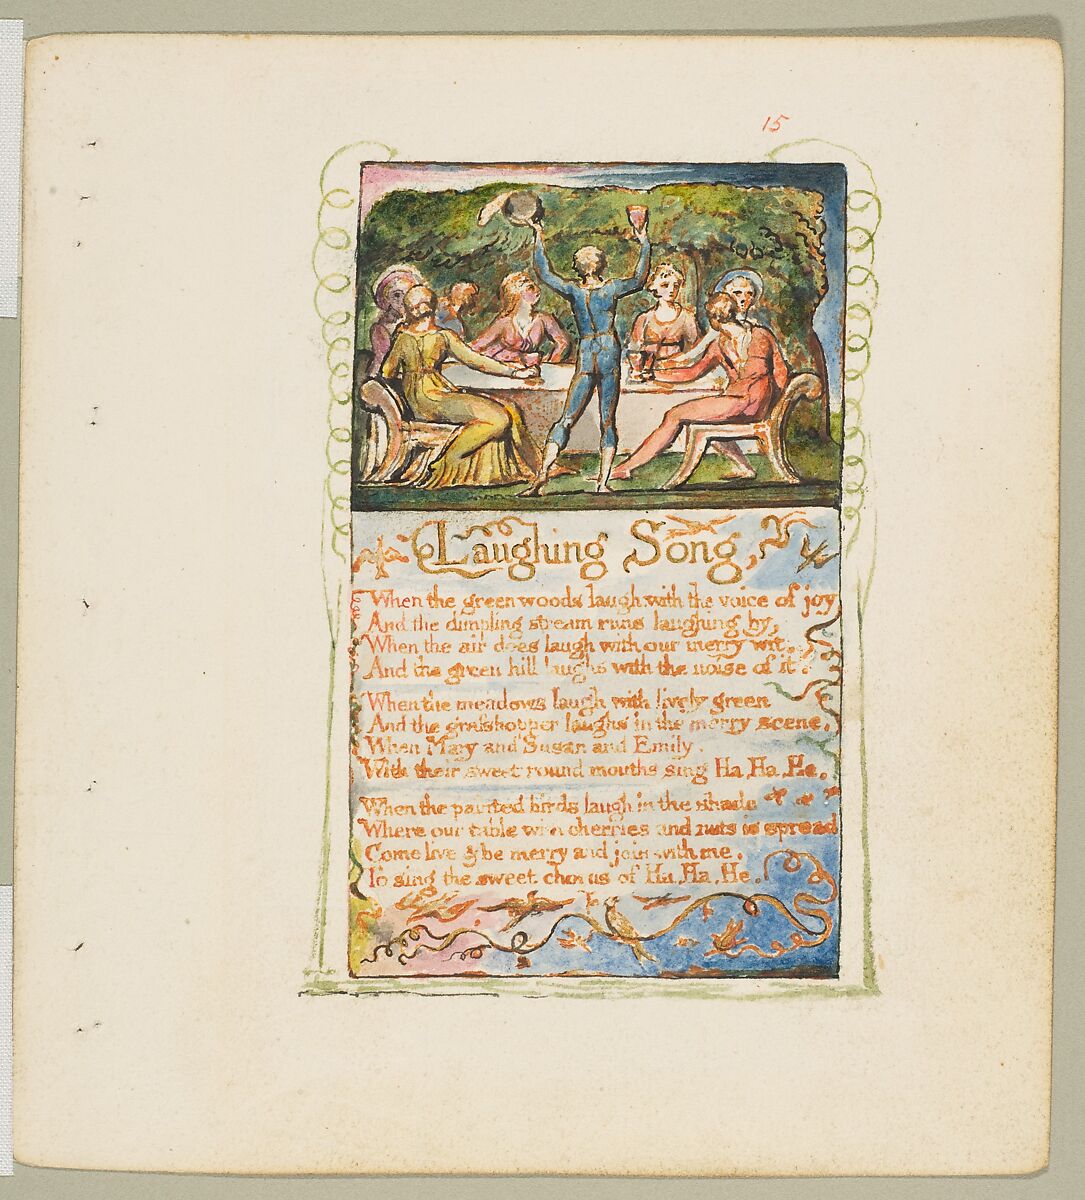 Songs of Innocence: Laughing Song, William Blake, Relief etching printed in orange-brown ink and hand-colored with watercolor and shell gold